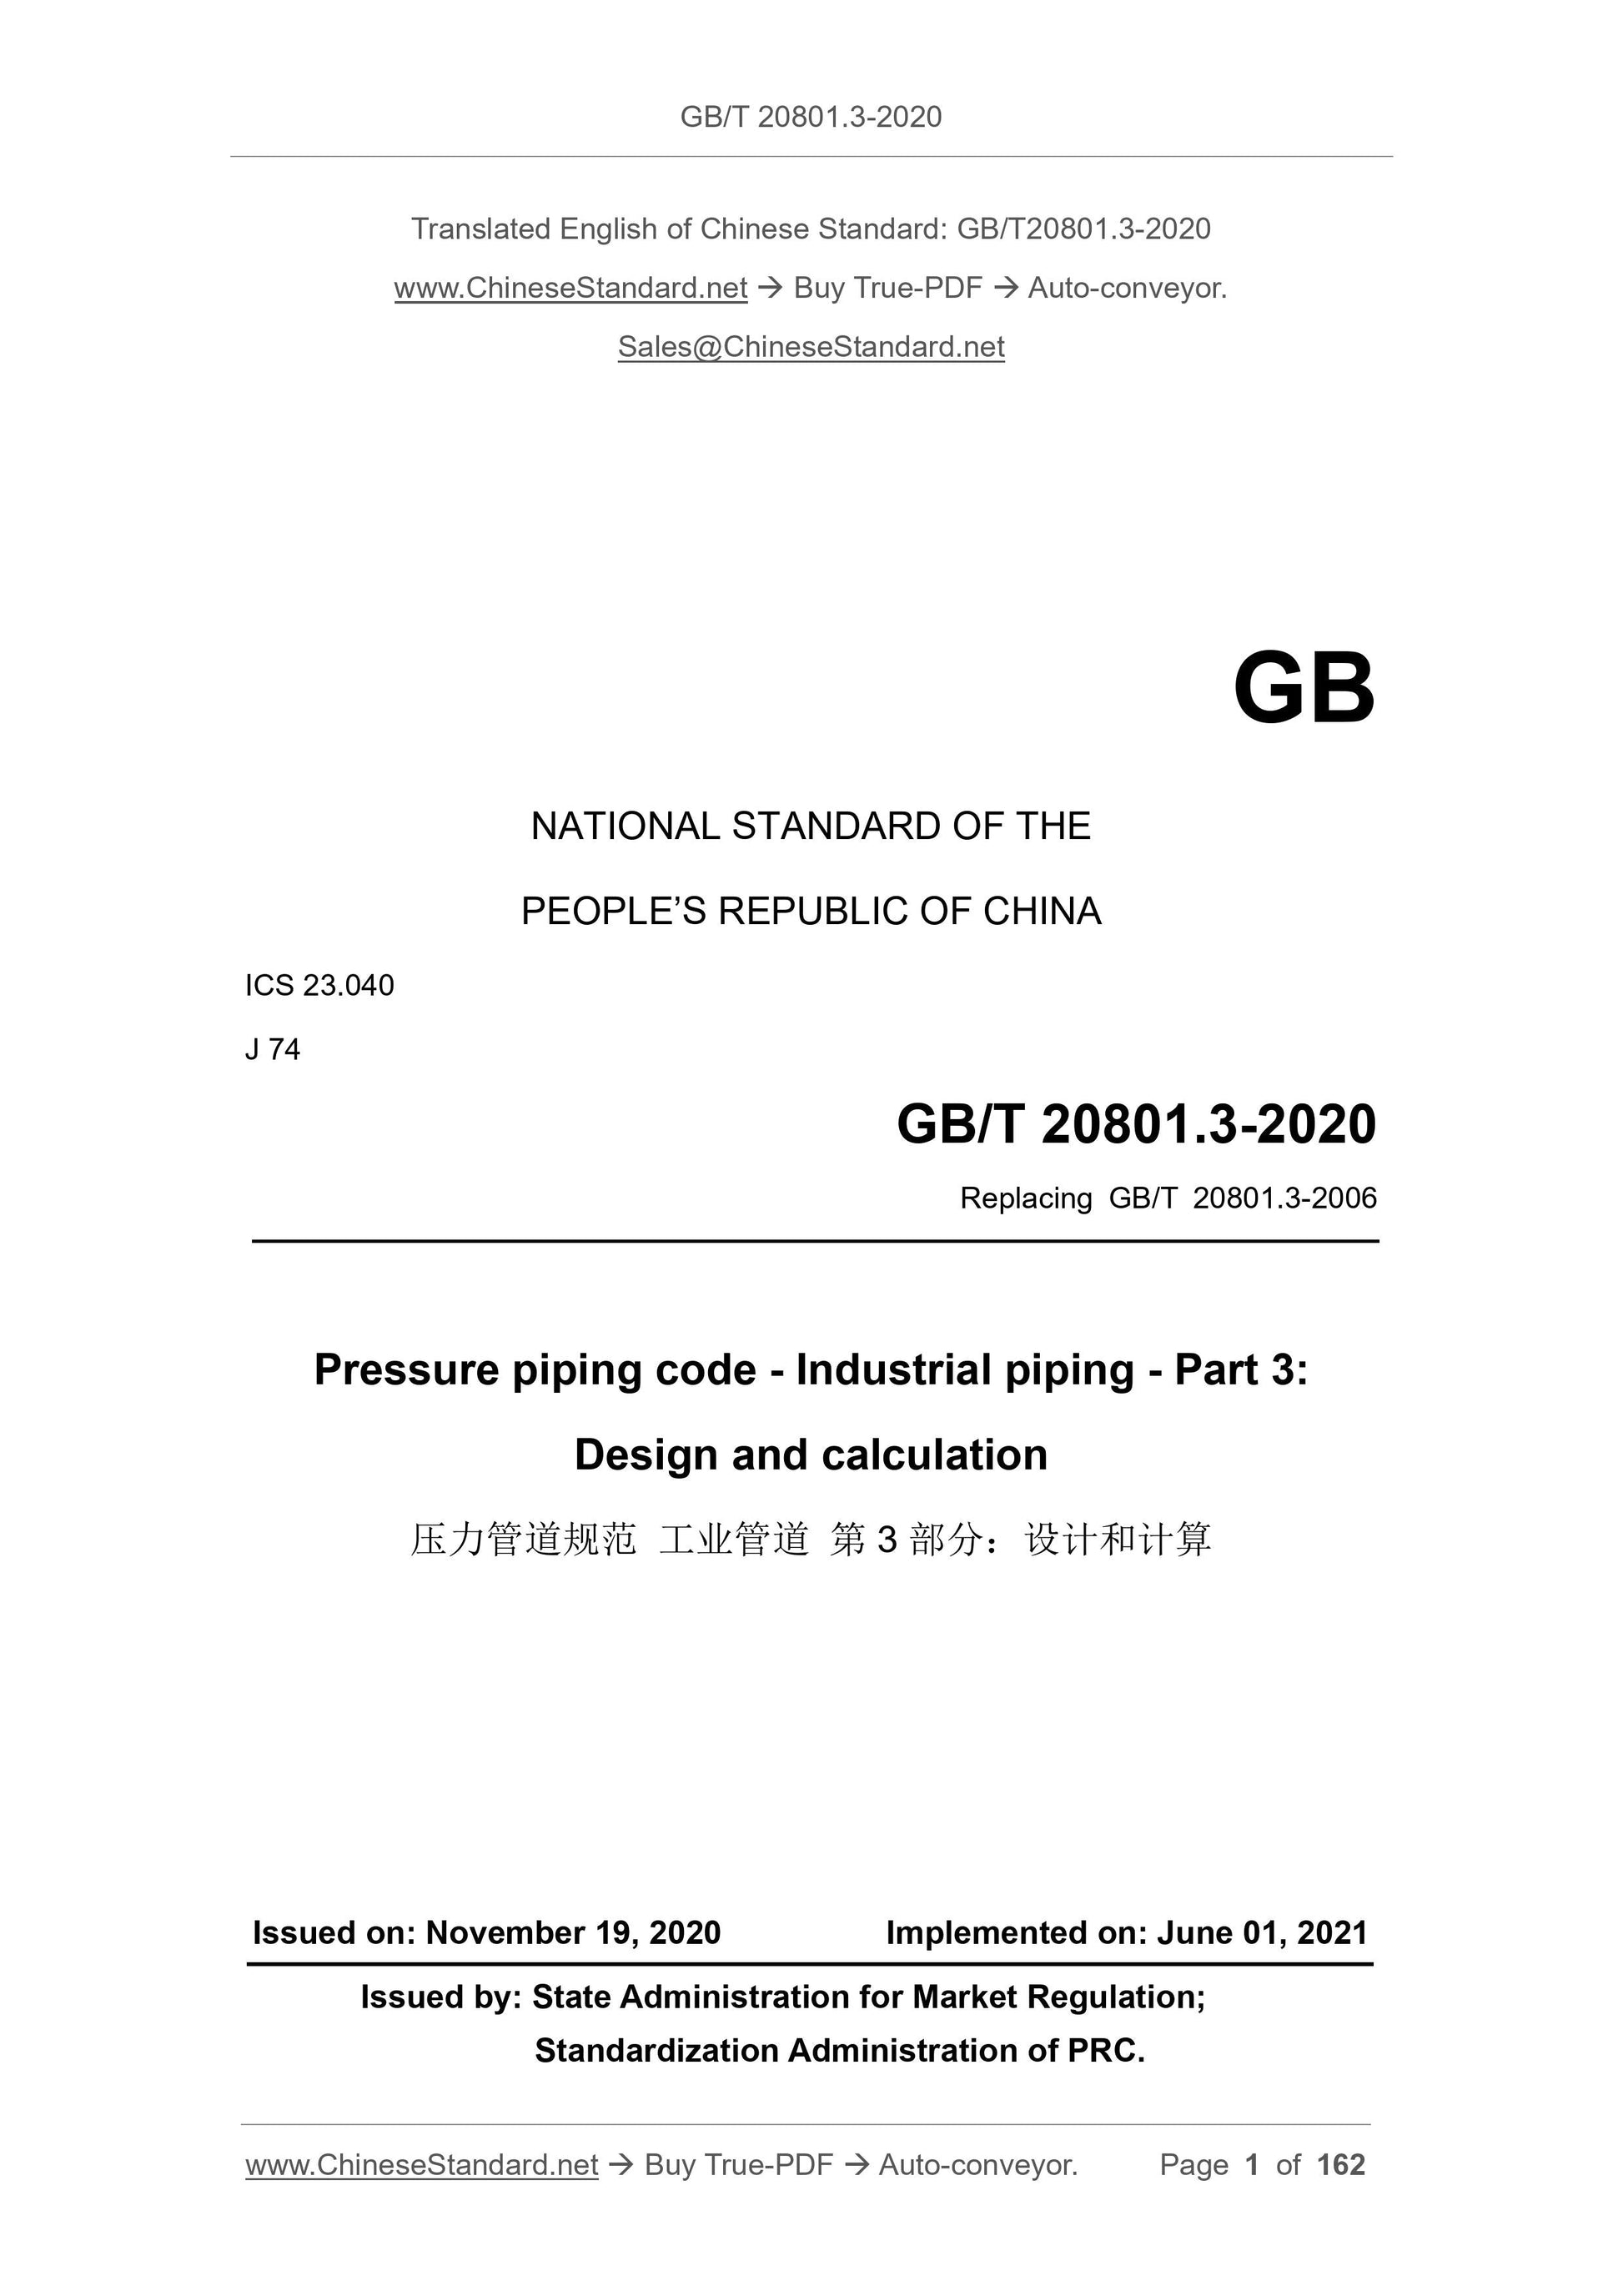 GB/T 20801.3-2020 Page 1